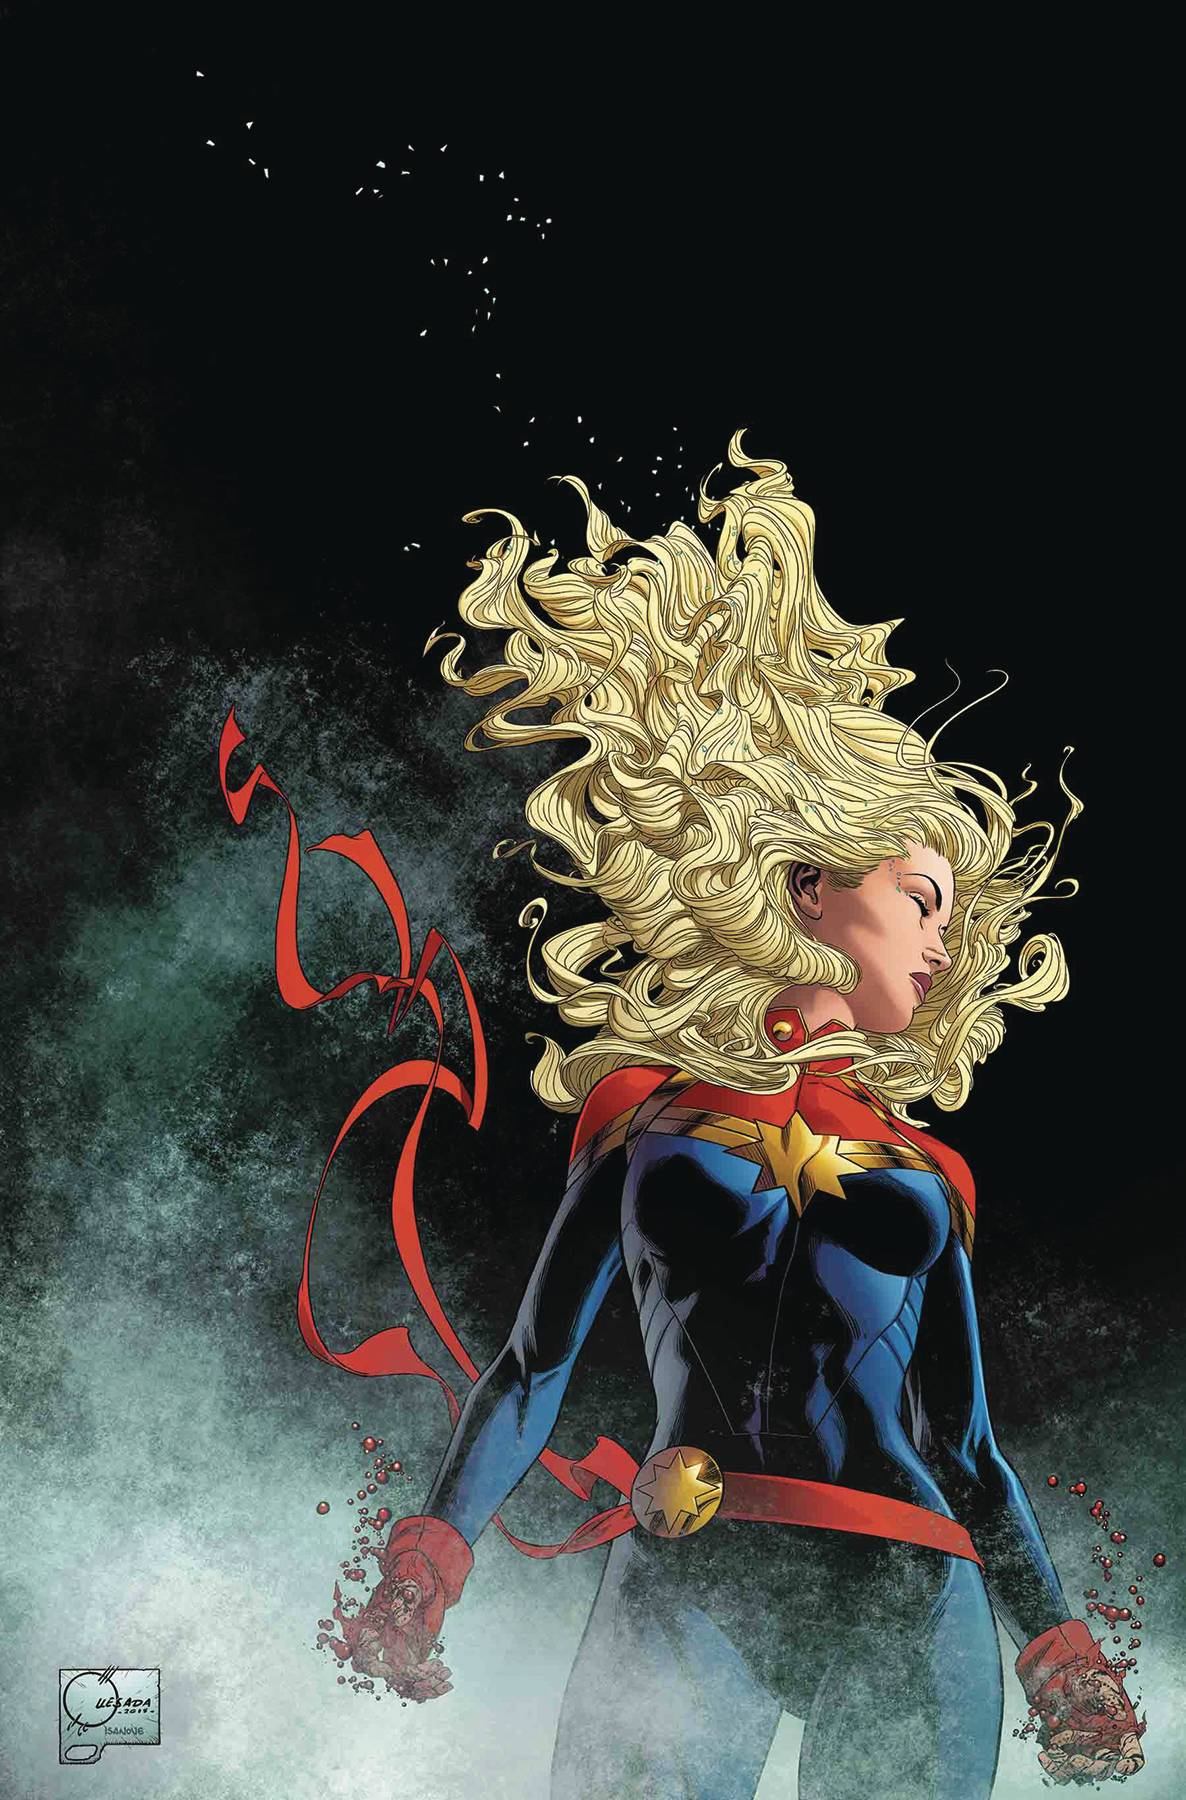 Life of Captain Marvel #3 by Quesada Poster